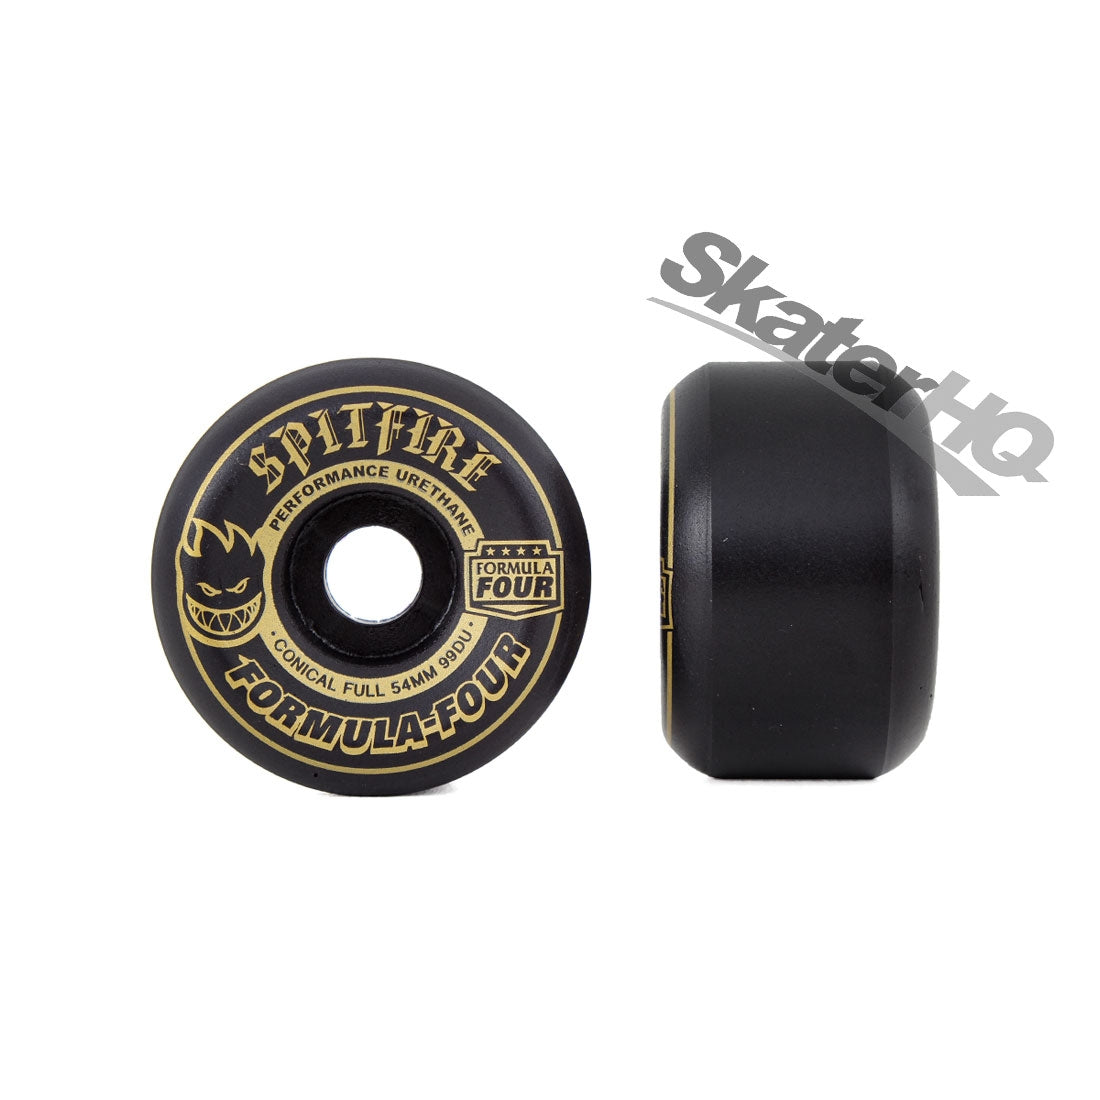 Spitfire Form Four 54mm 99a Conical Full - Blackout Skateboard Wheels